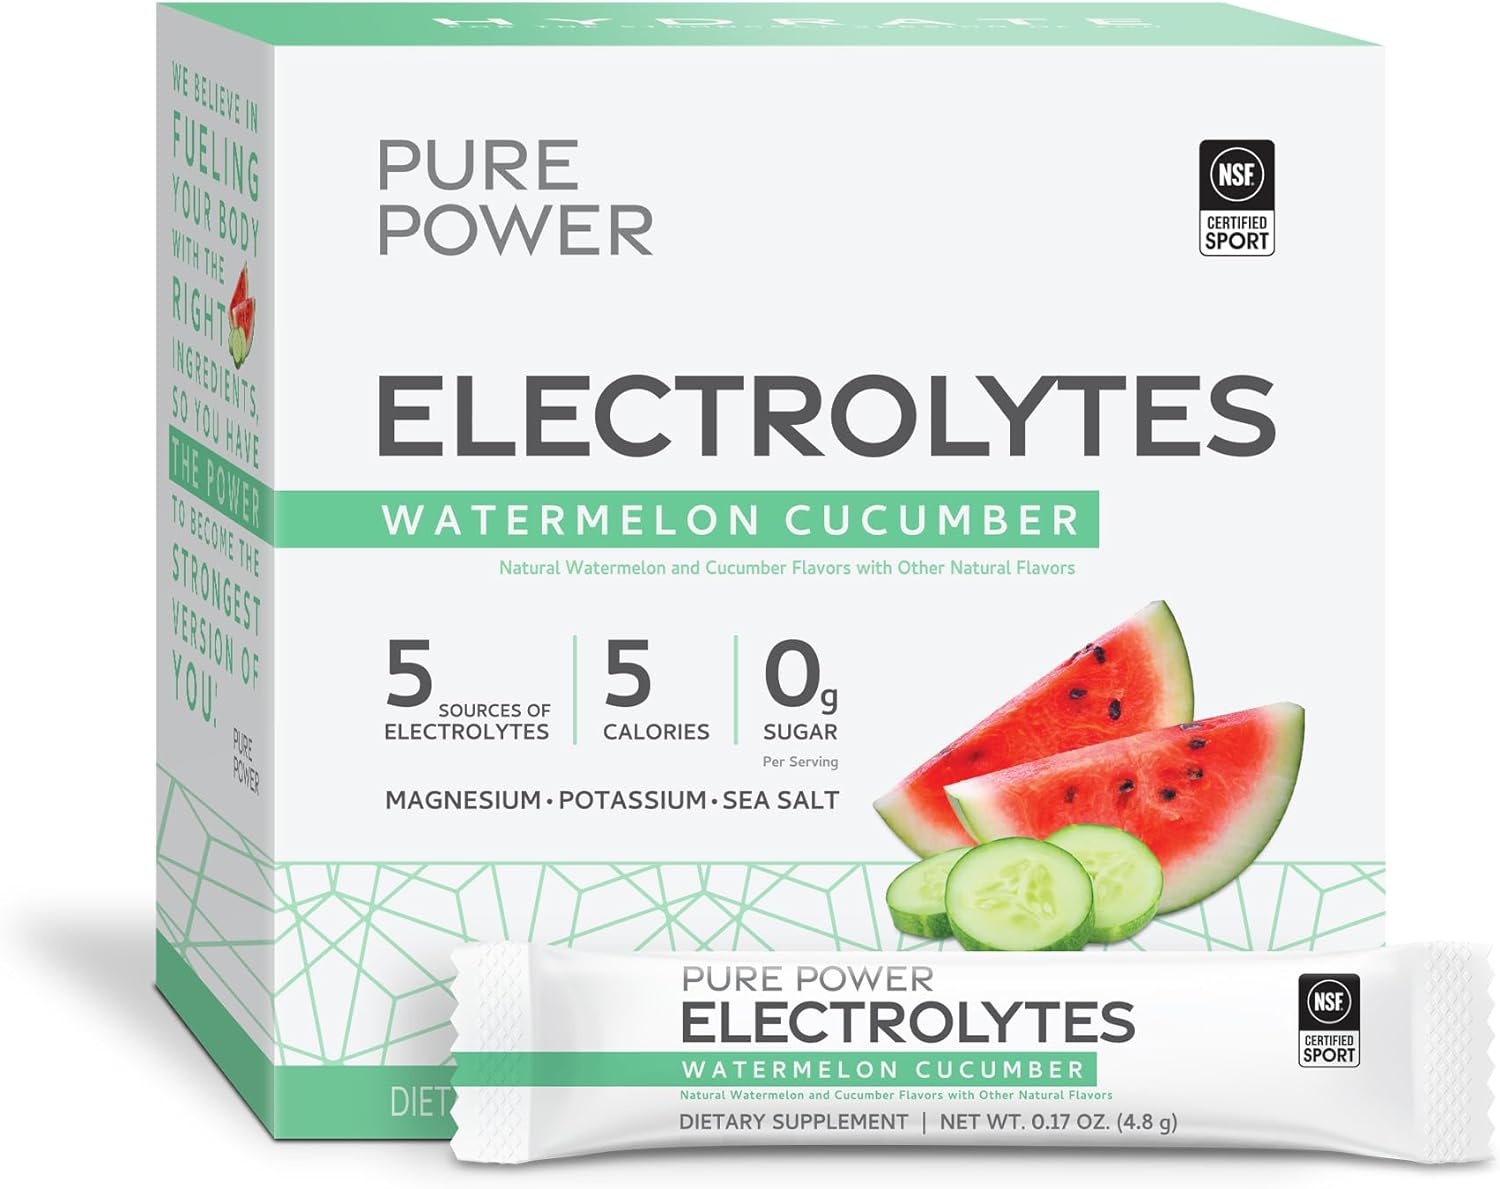 Dr. Mercola Pure Power Electrolytes, Watermelon Cucumber Flavor, 5.13 oz (145.6 g), 30 Servings (30 Packets), 5 Calories and 0g Sugar Per Serving